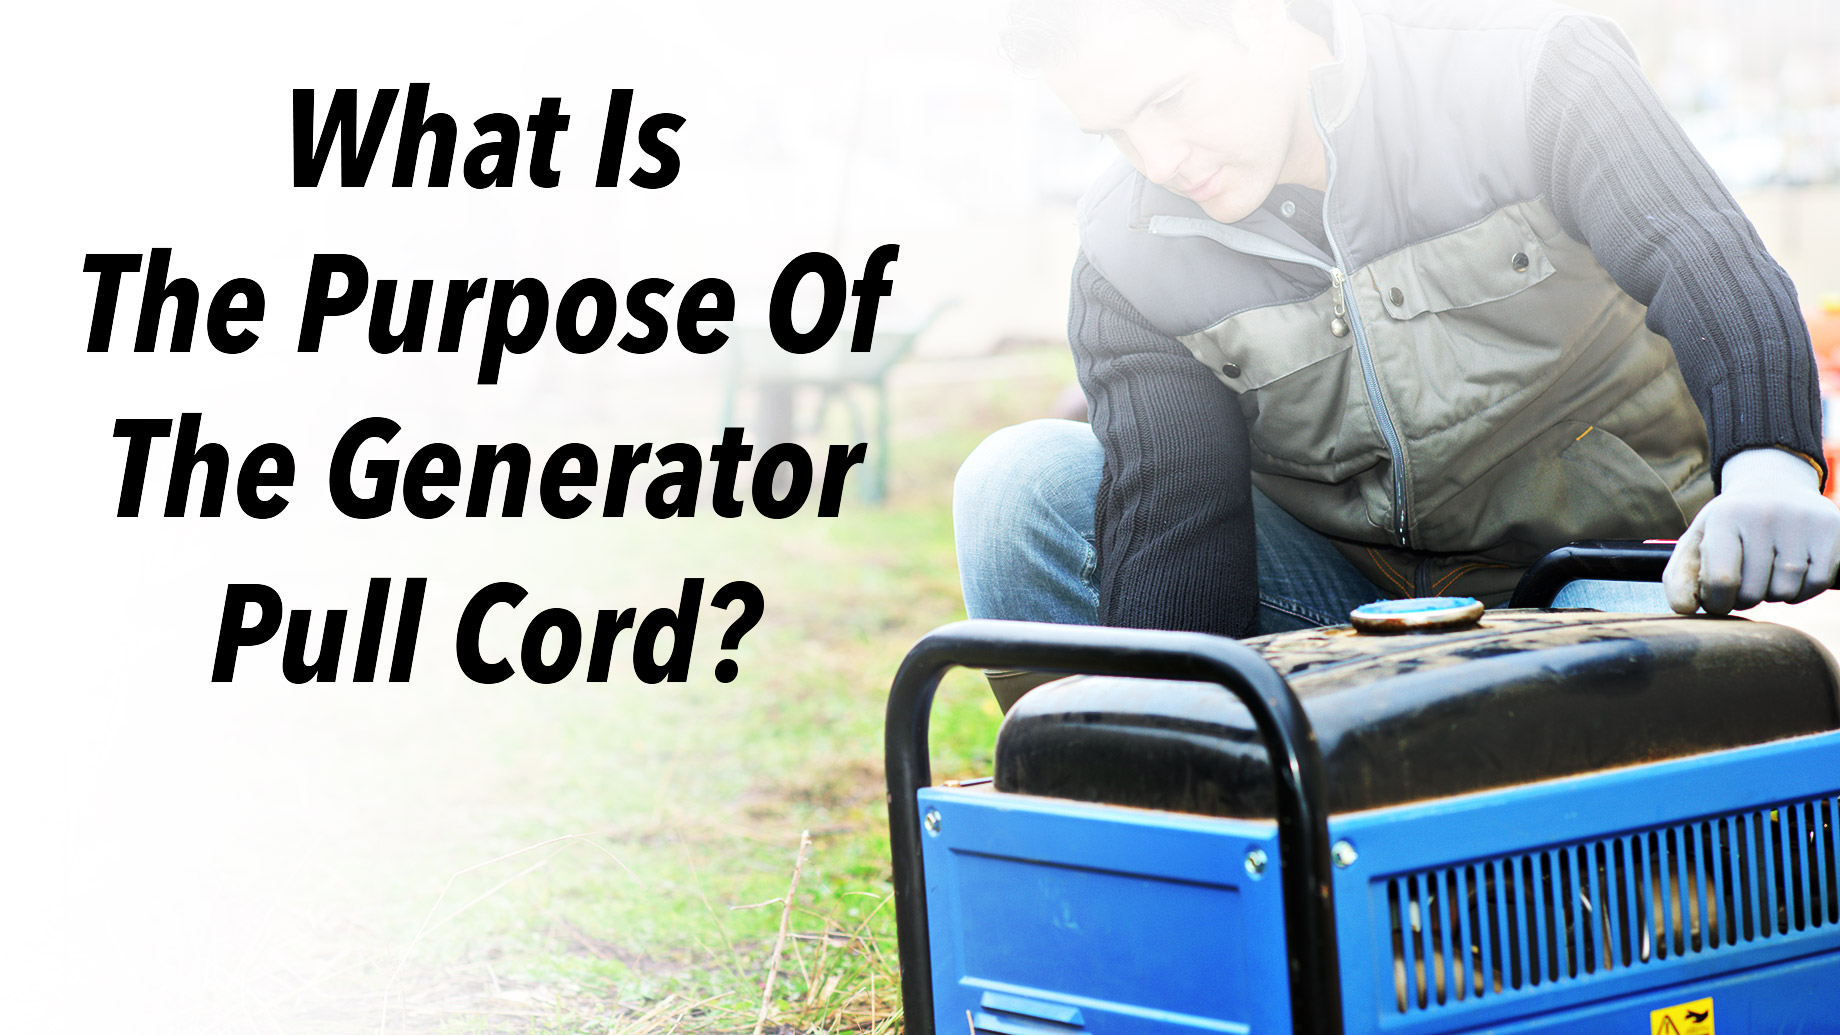 What Is The Purpose Of The Generator Pull Cord?